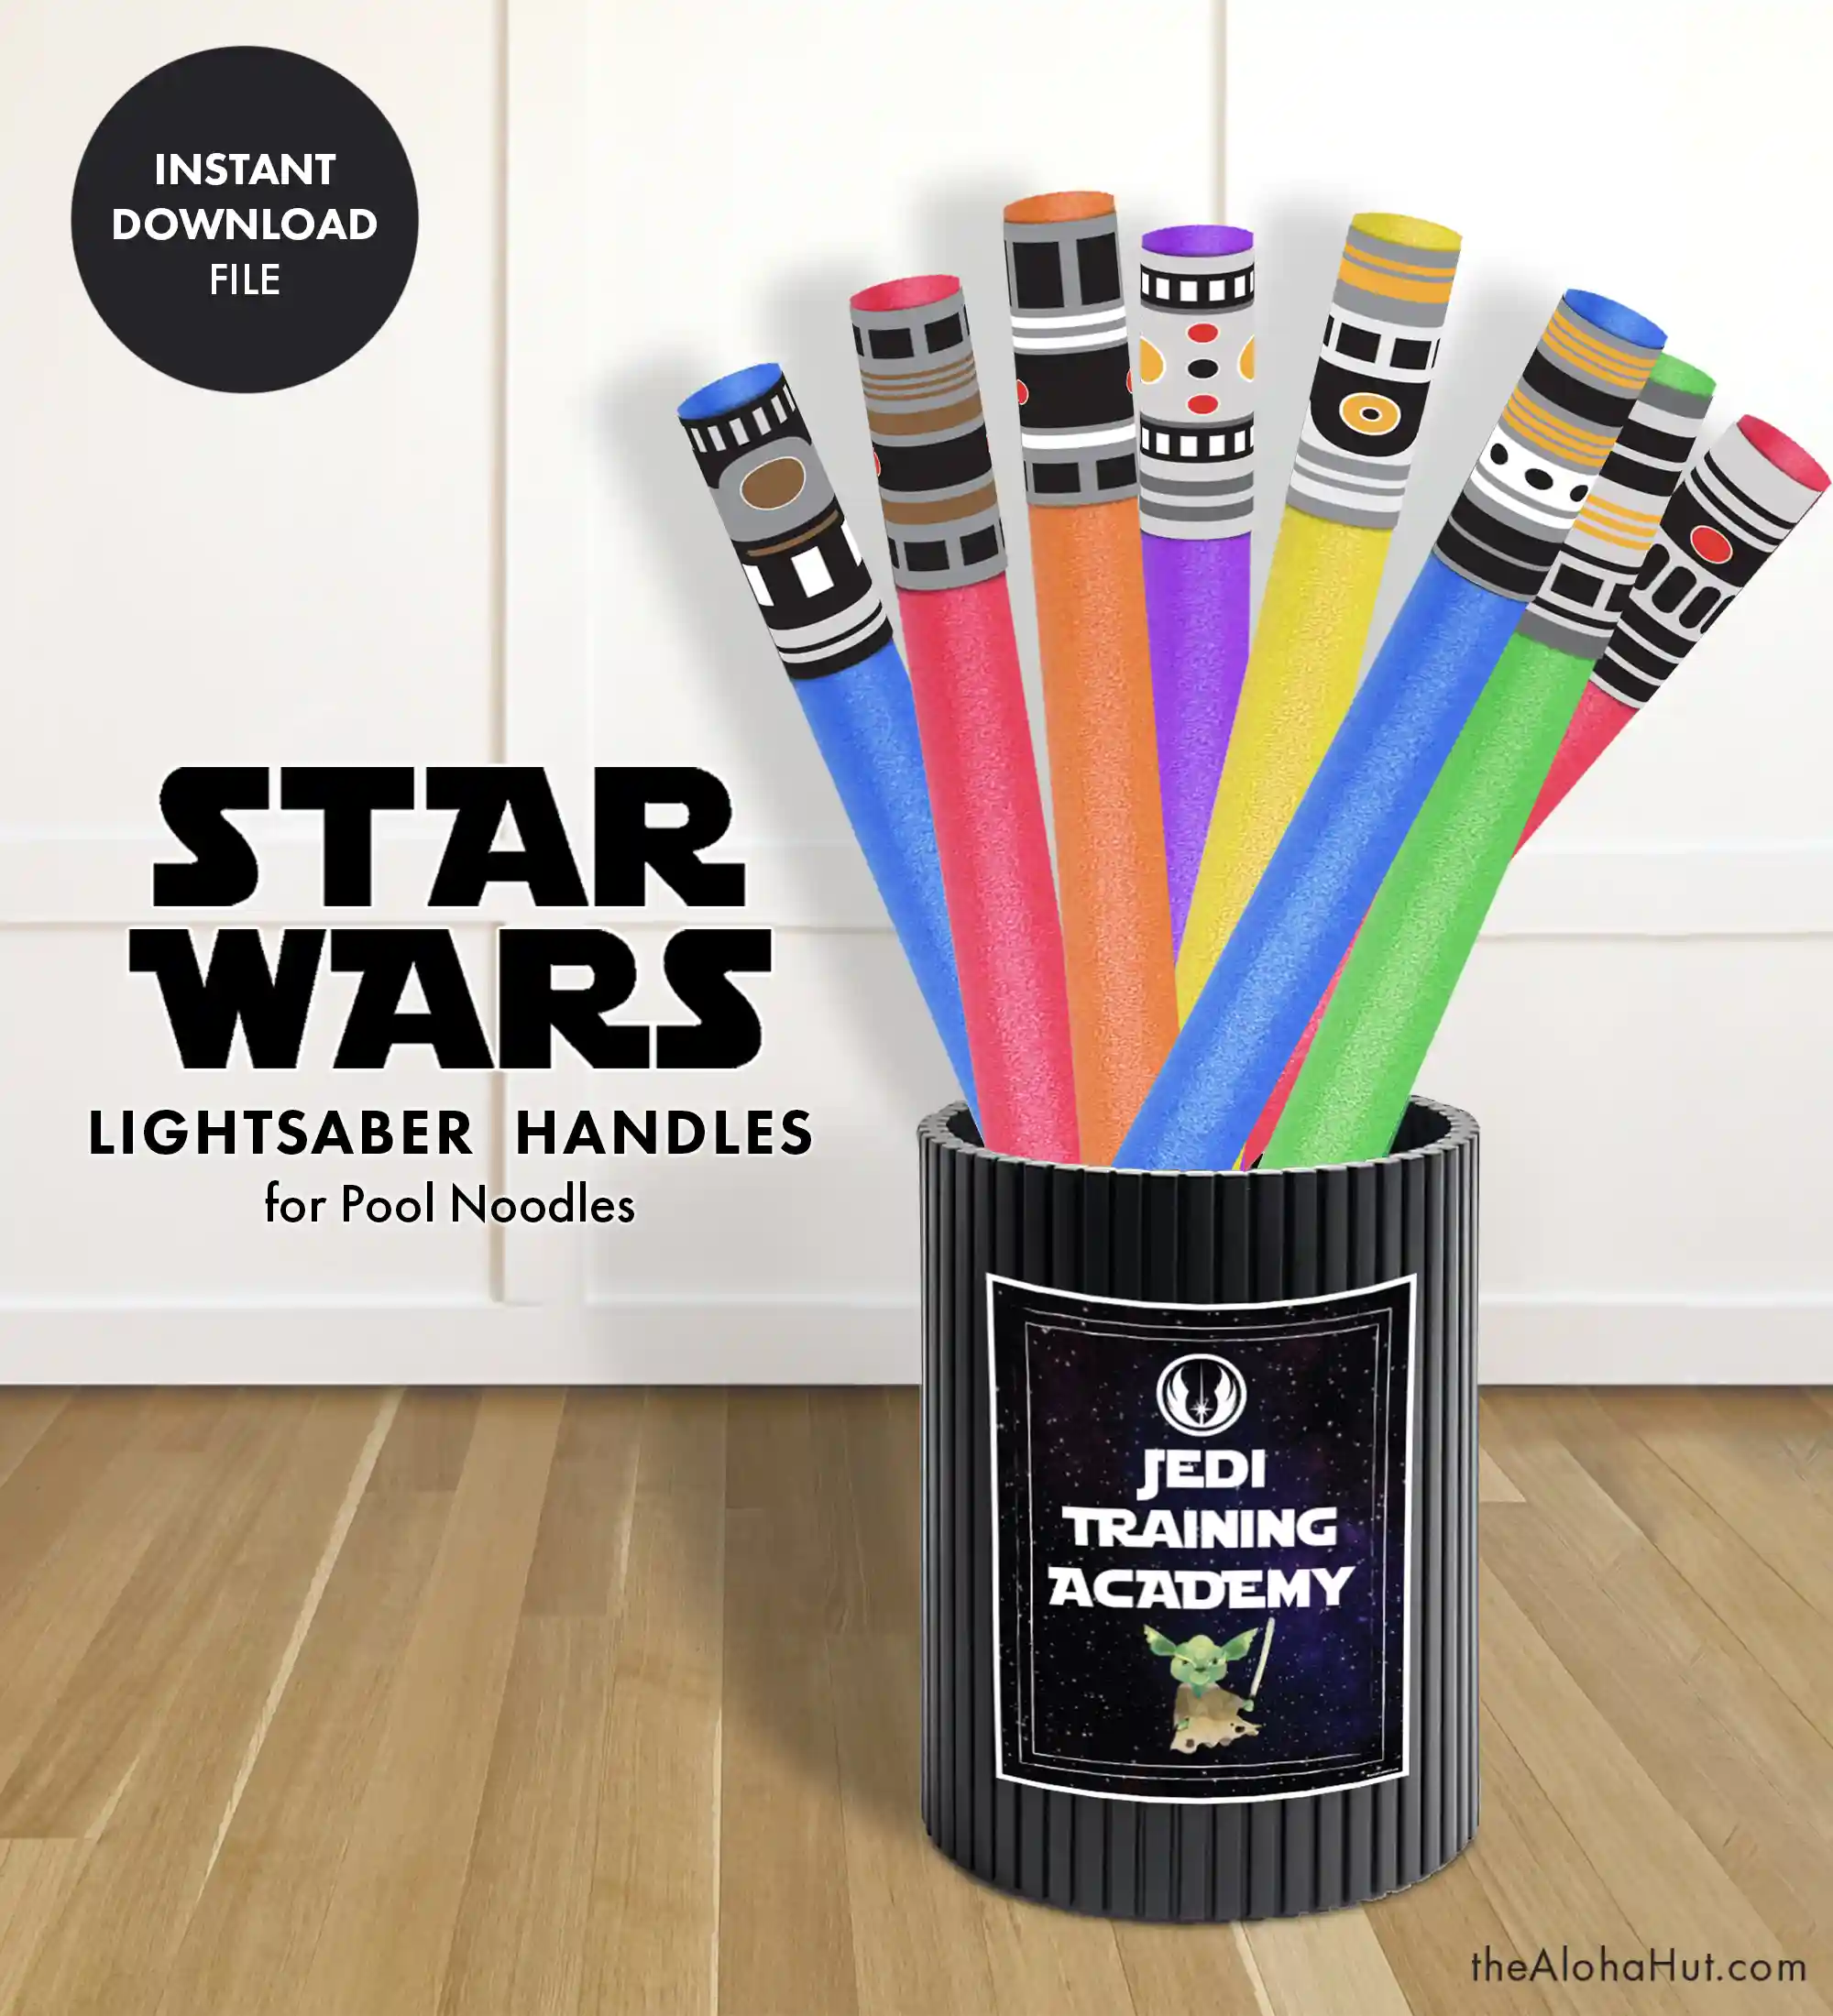 Star Wars party ideas, activities, birthday party games, decorations, and prints. Ideas and tips and tricks for throwing the best Star Wars themed kids birthday party, baby shower, or one with the force celebration. Includes Star Wars printable games, decorations (cupcake toppers, banners, gift tags, characters) and Star Wars party games (BINGO, scavenger hunt, pin the lightsaber on Yoda or Darth Vader). Pool noodle lightsaber handles and tutorial.